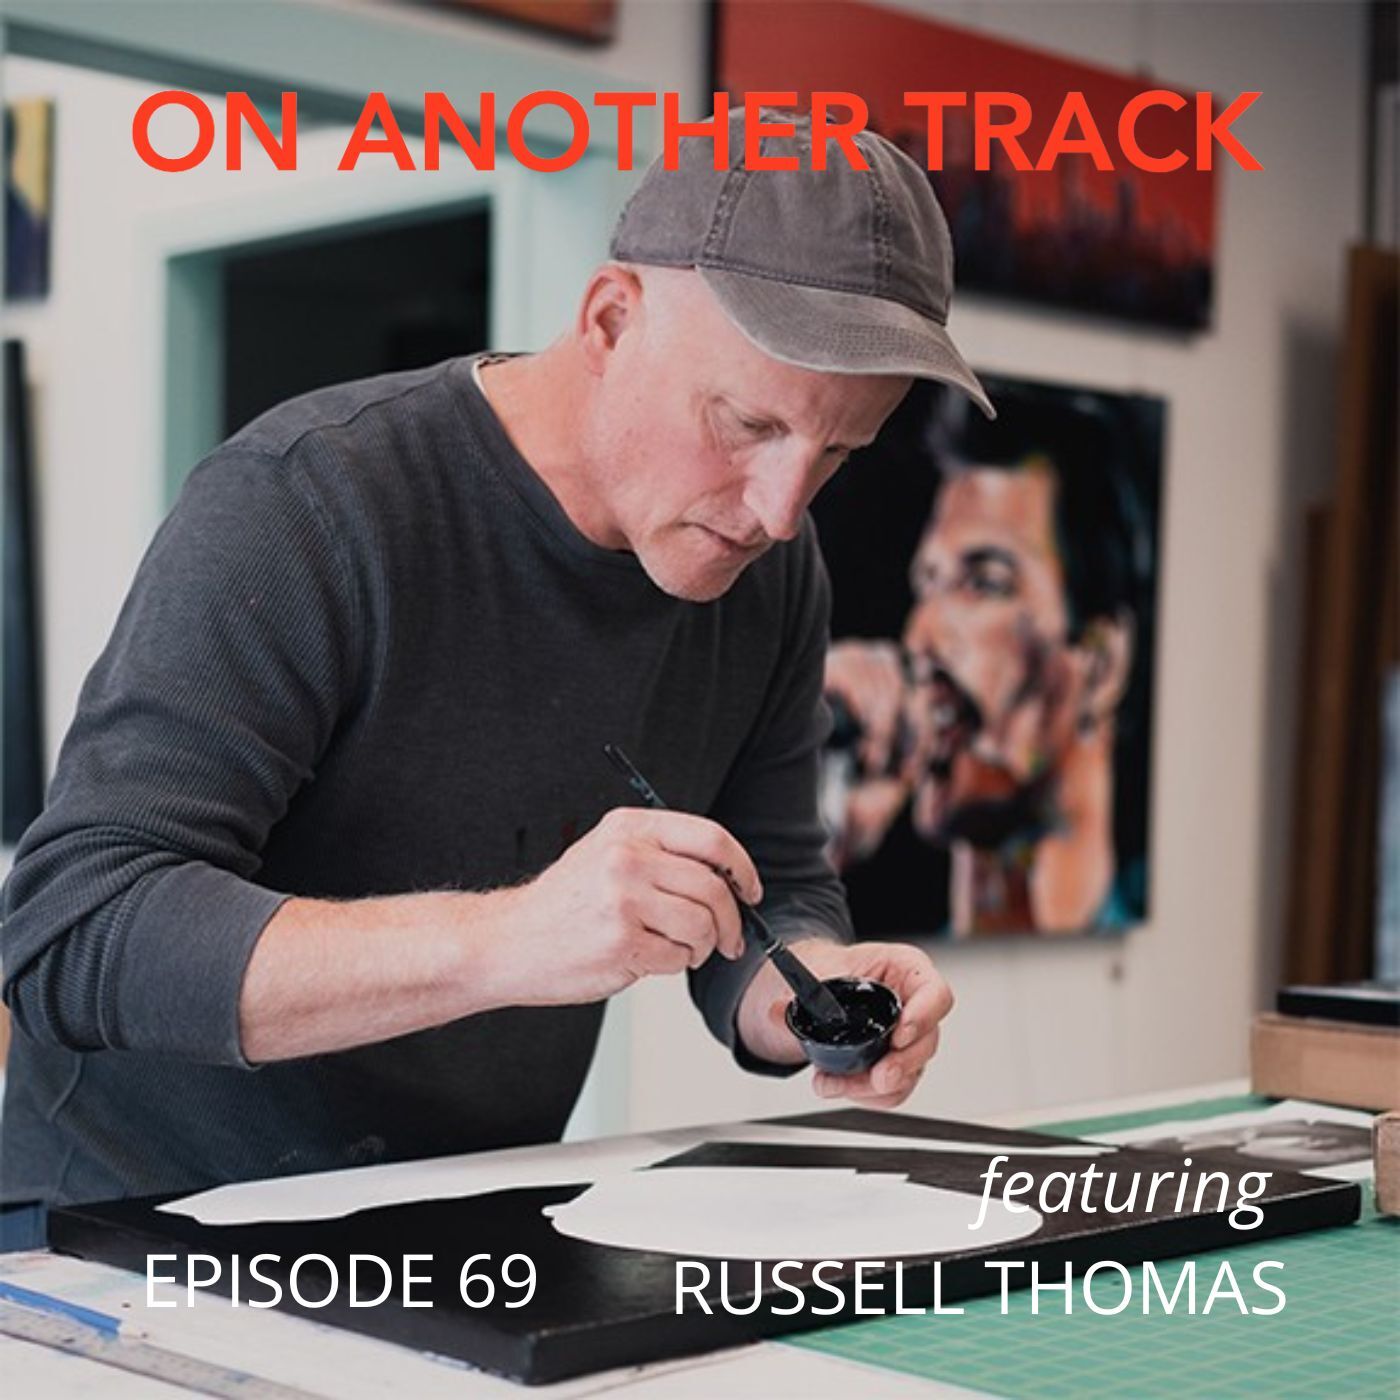 Russell Thomas - Extraordinary human connections through inspiring paintings! Image